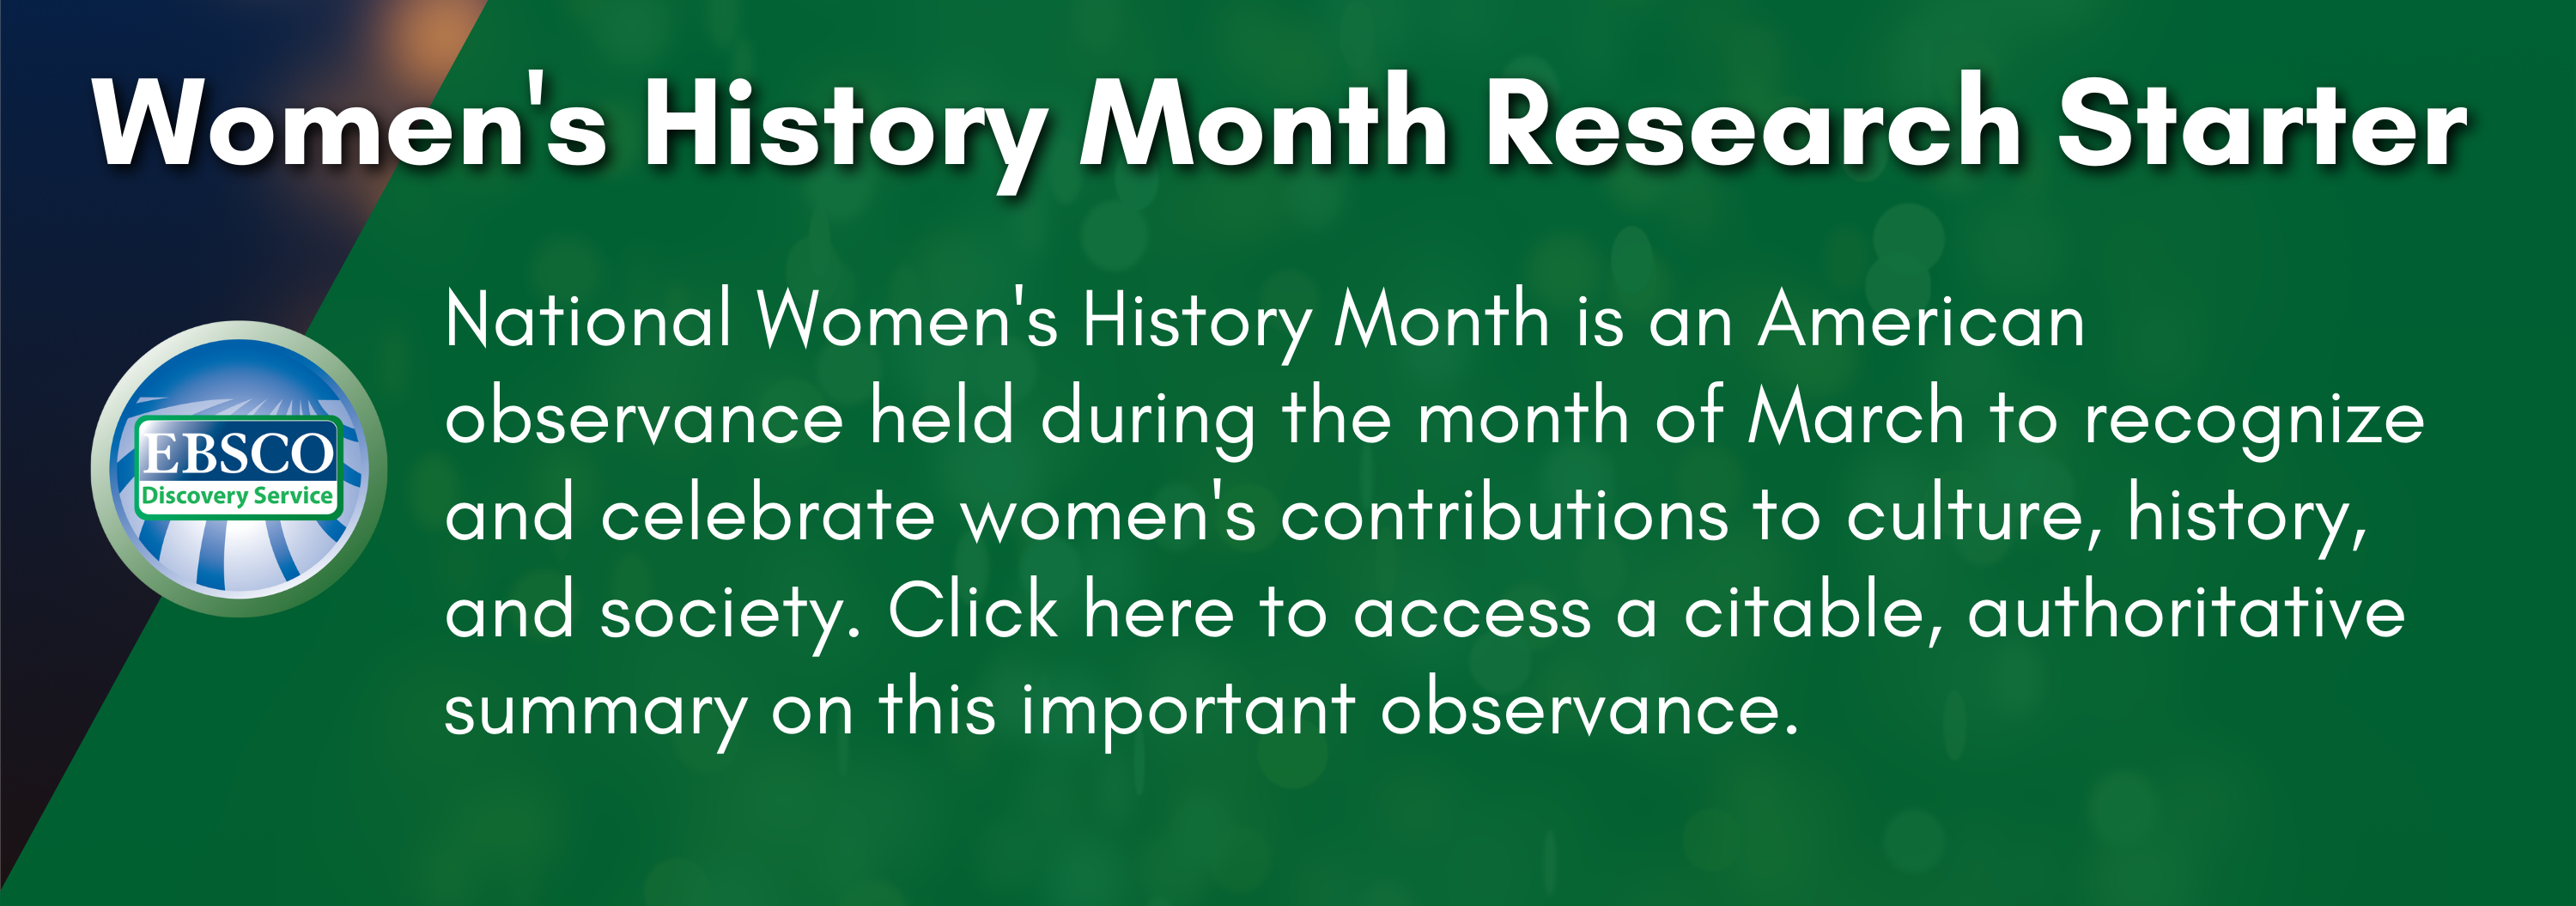 Women's History Month Research Starter